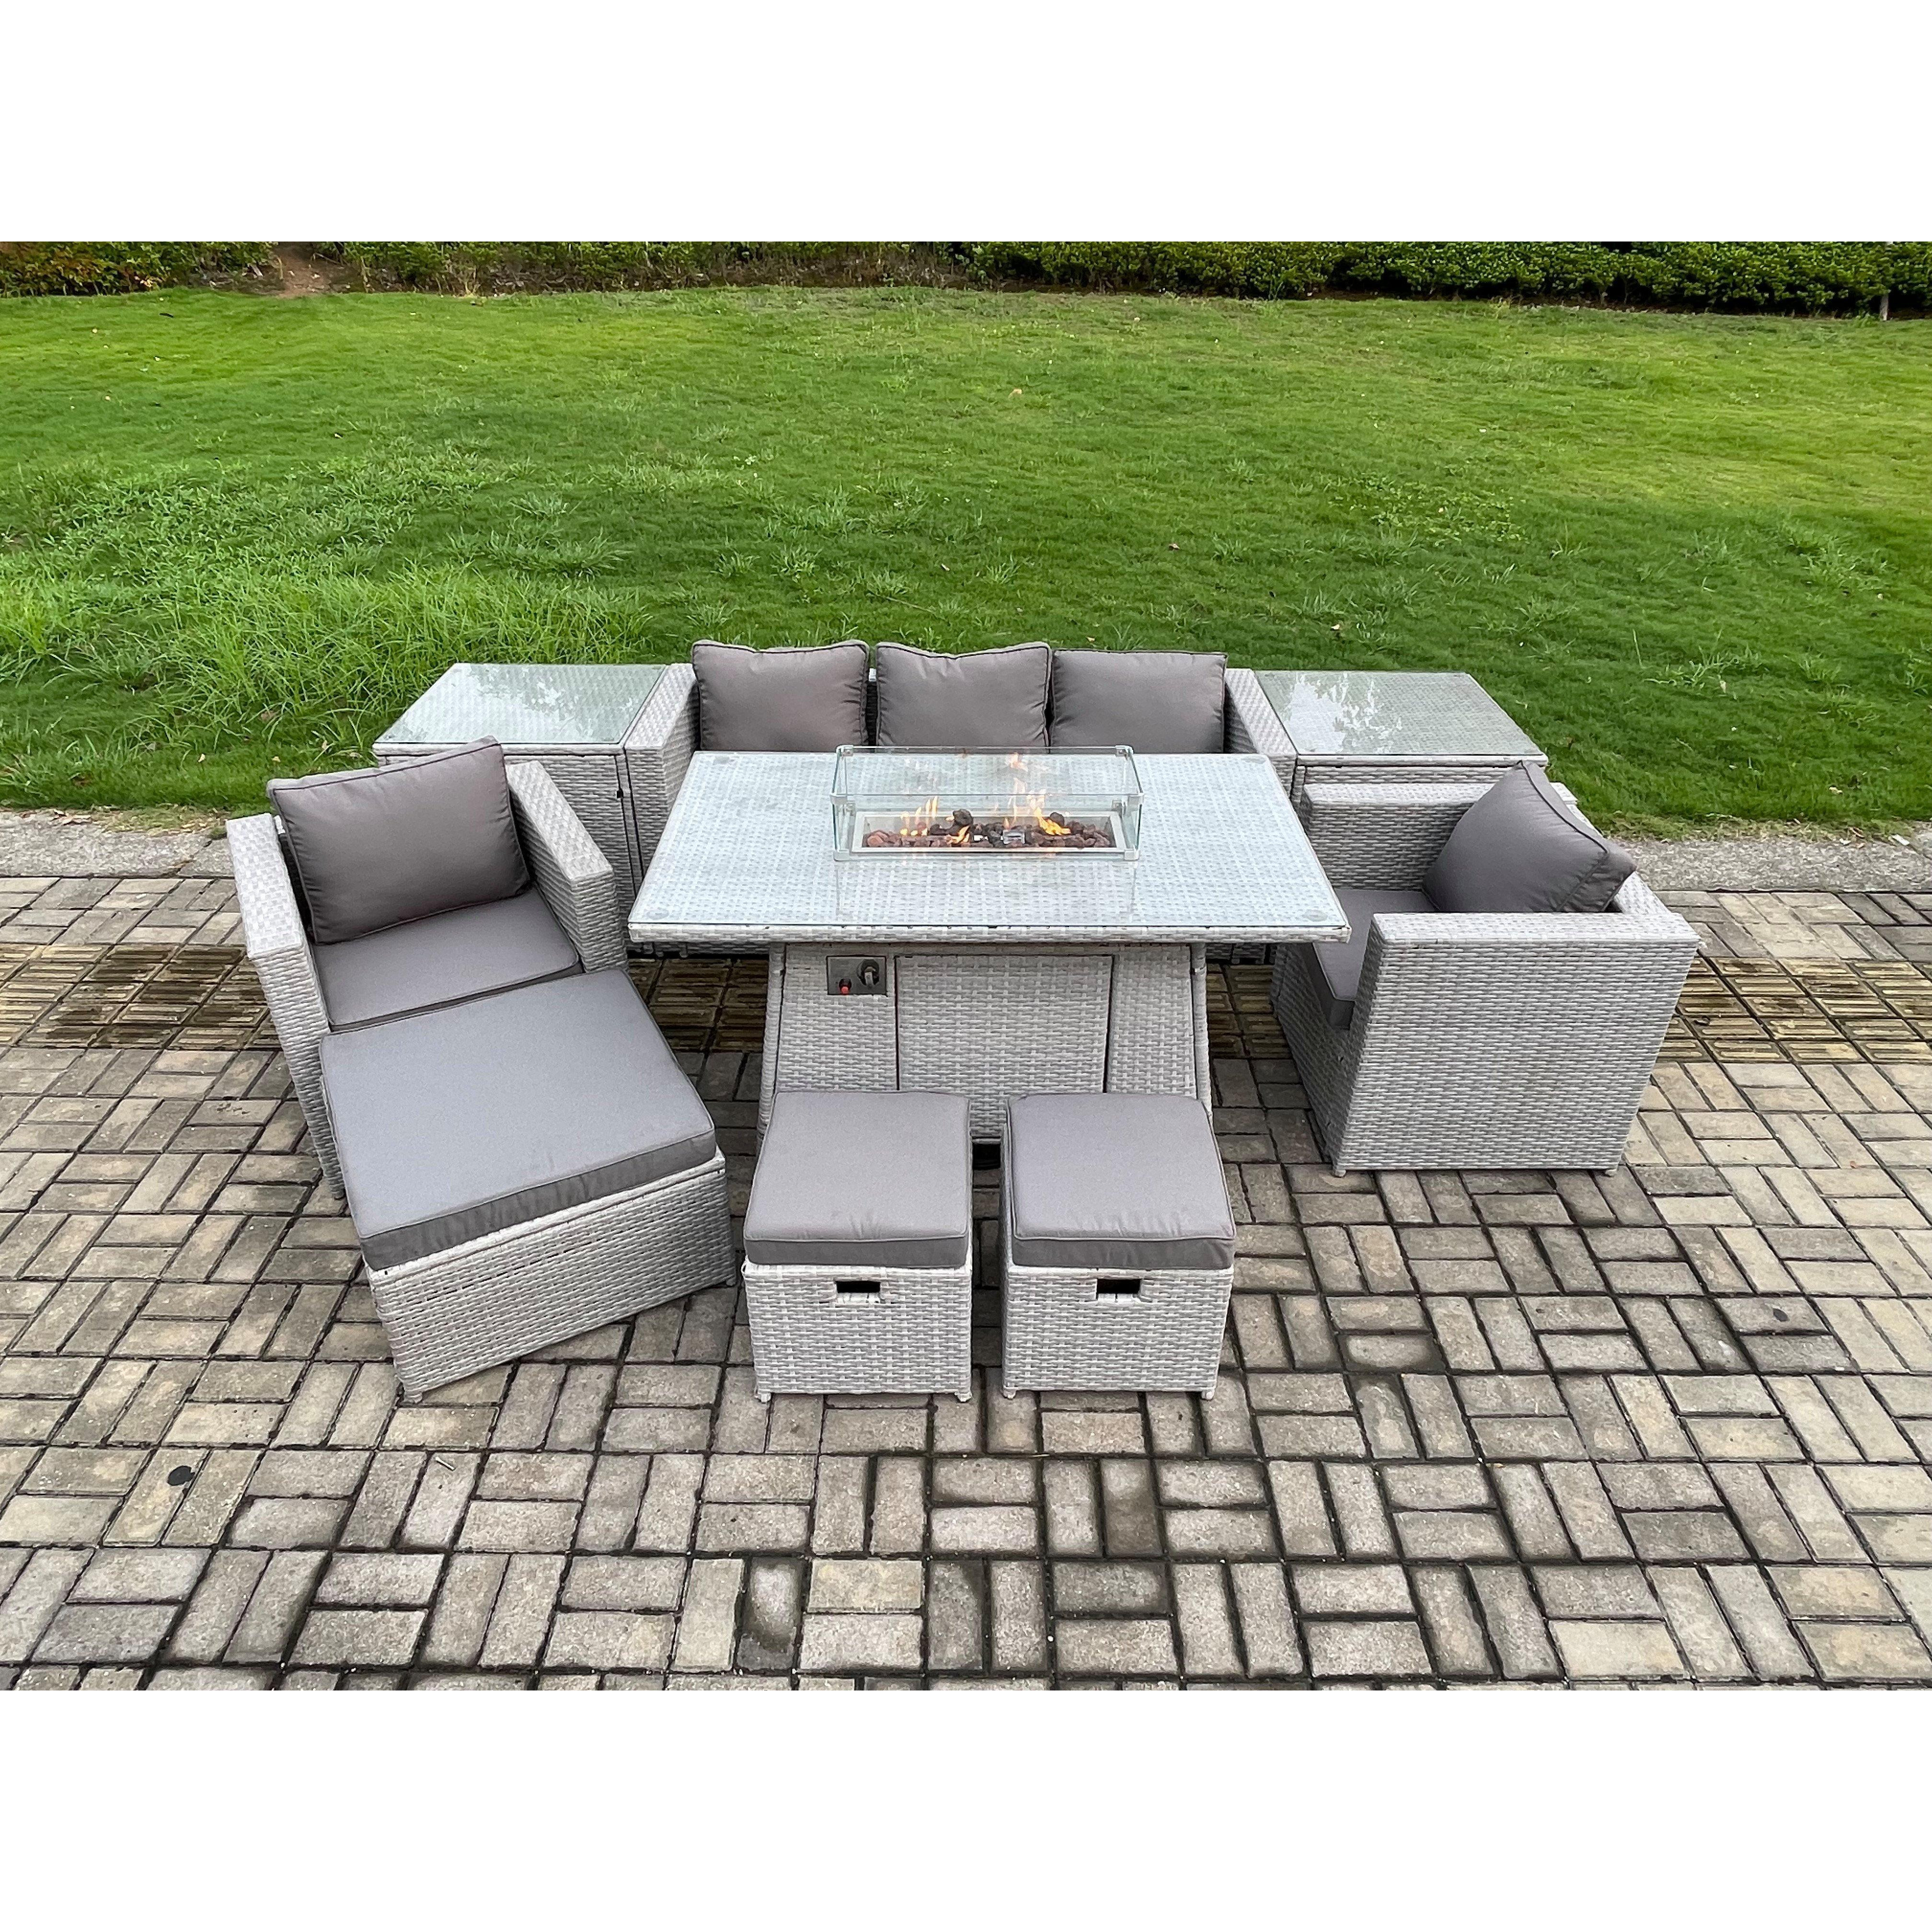 Outdoor Garden Dining Sets Rattan Furniture Gas Fire Pit Dining Table With 2 Armchairs 2 Side Tables - image 1